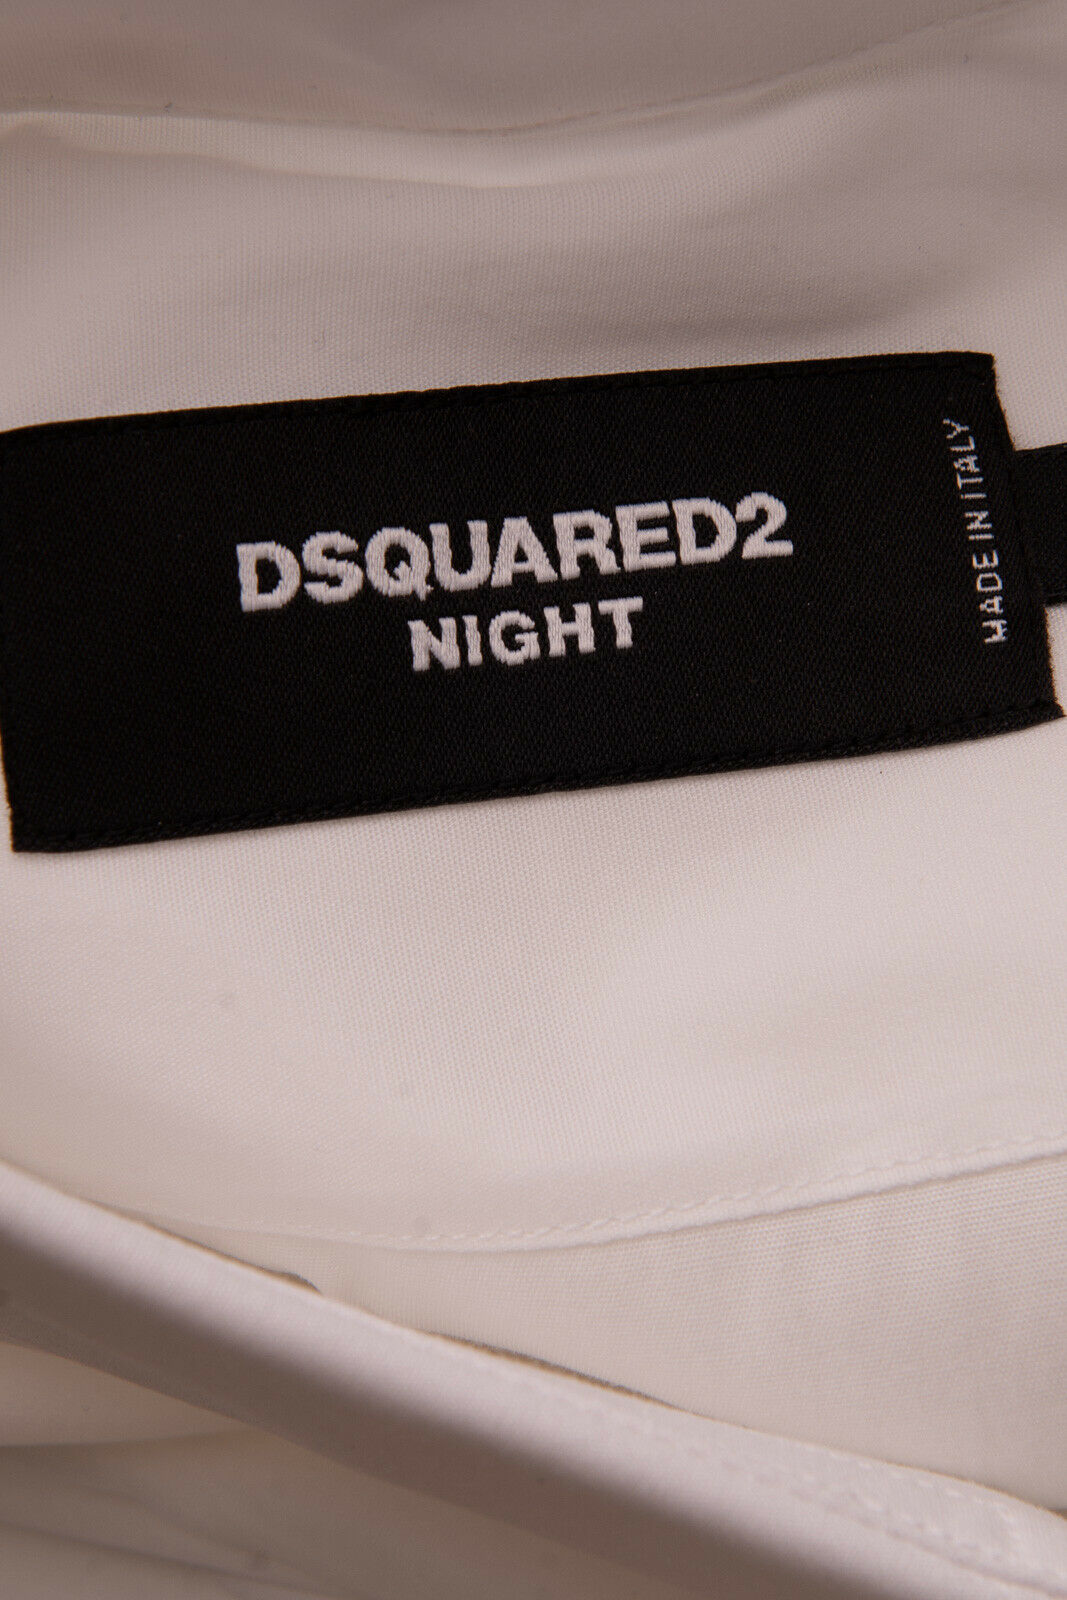 DSQUARED2 Womens Shirt Size 44  Made in Italy